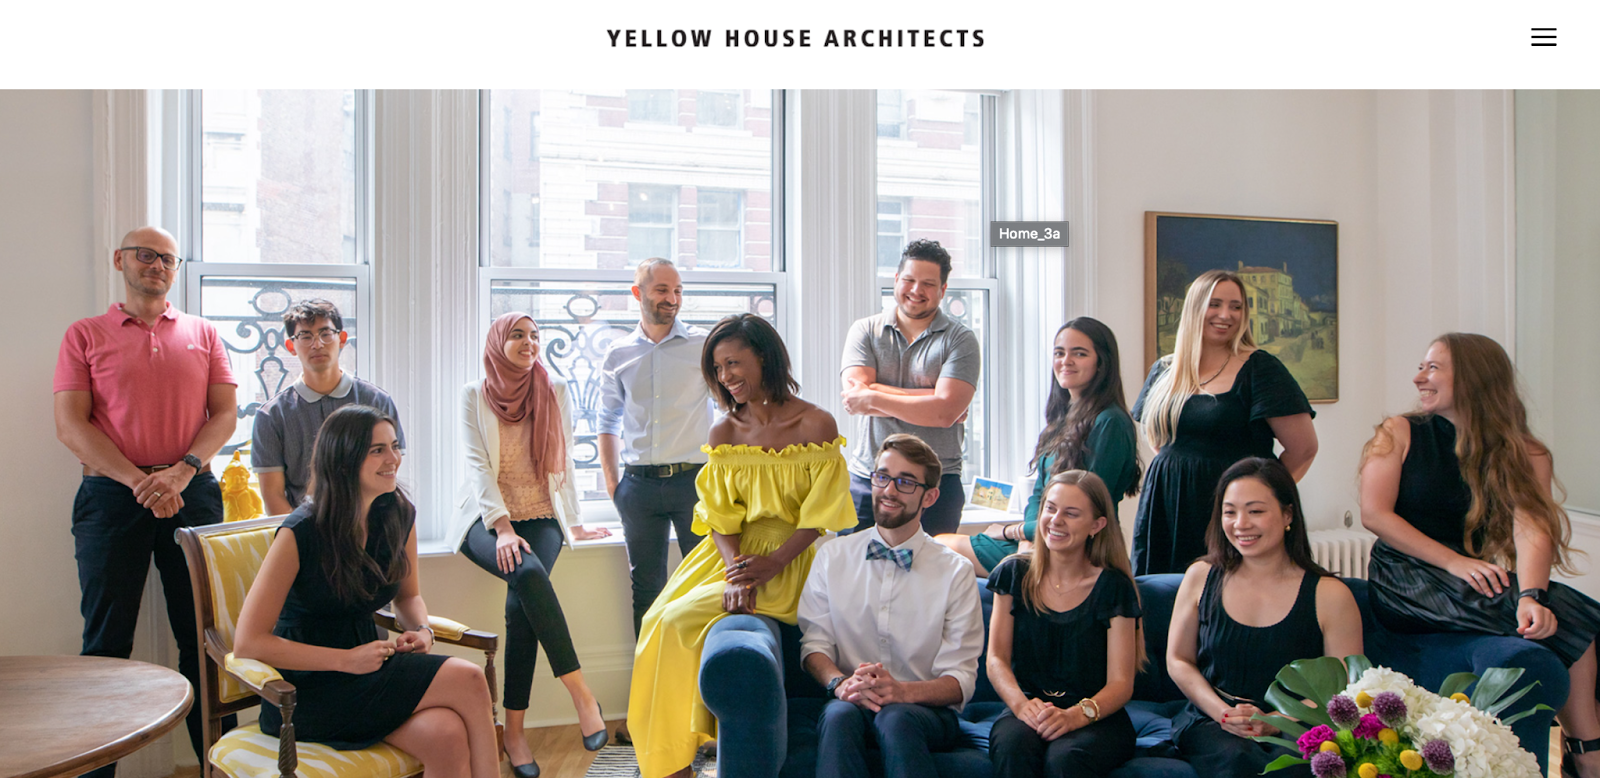 Architecture website example: Yellow House Architects